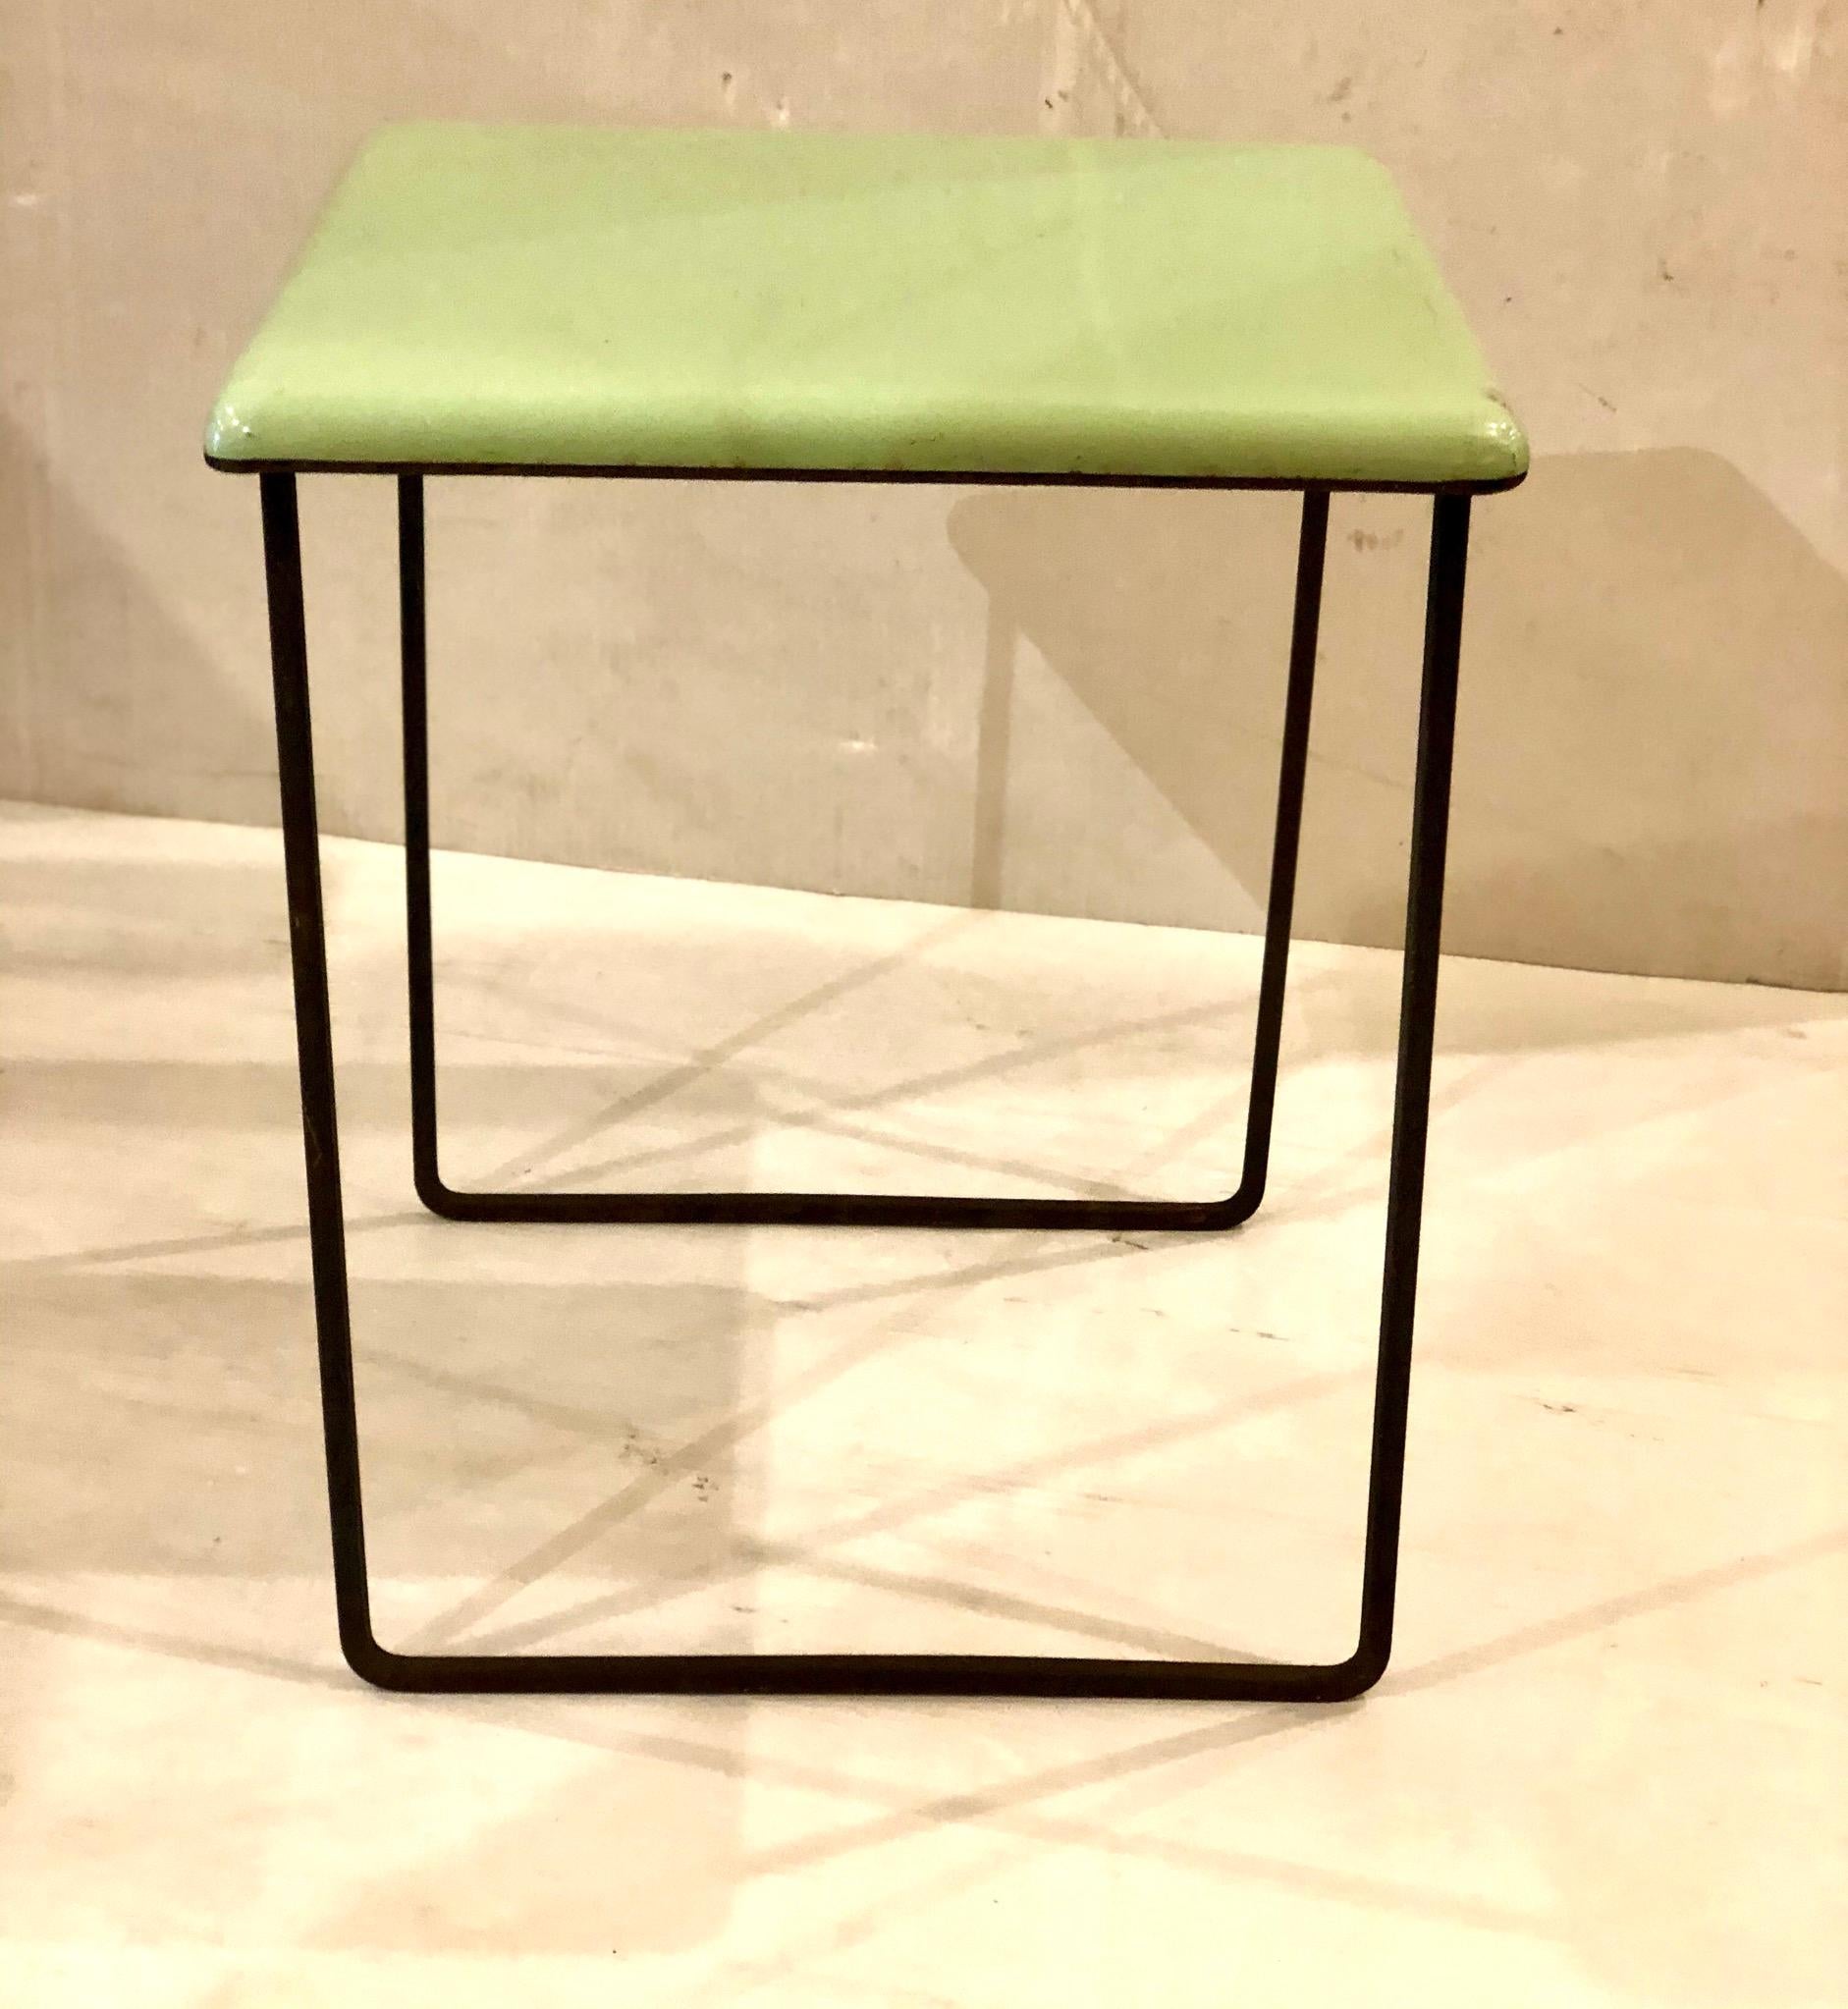 Beautiful pistachio enameled top 1950s small table. Solid iron base the top shows light wear due to age but no chips great unique piece. We left the base in original finish with nice patina.